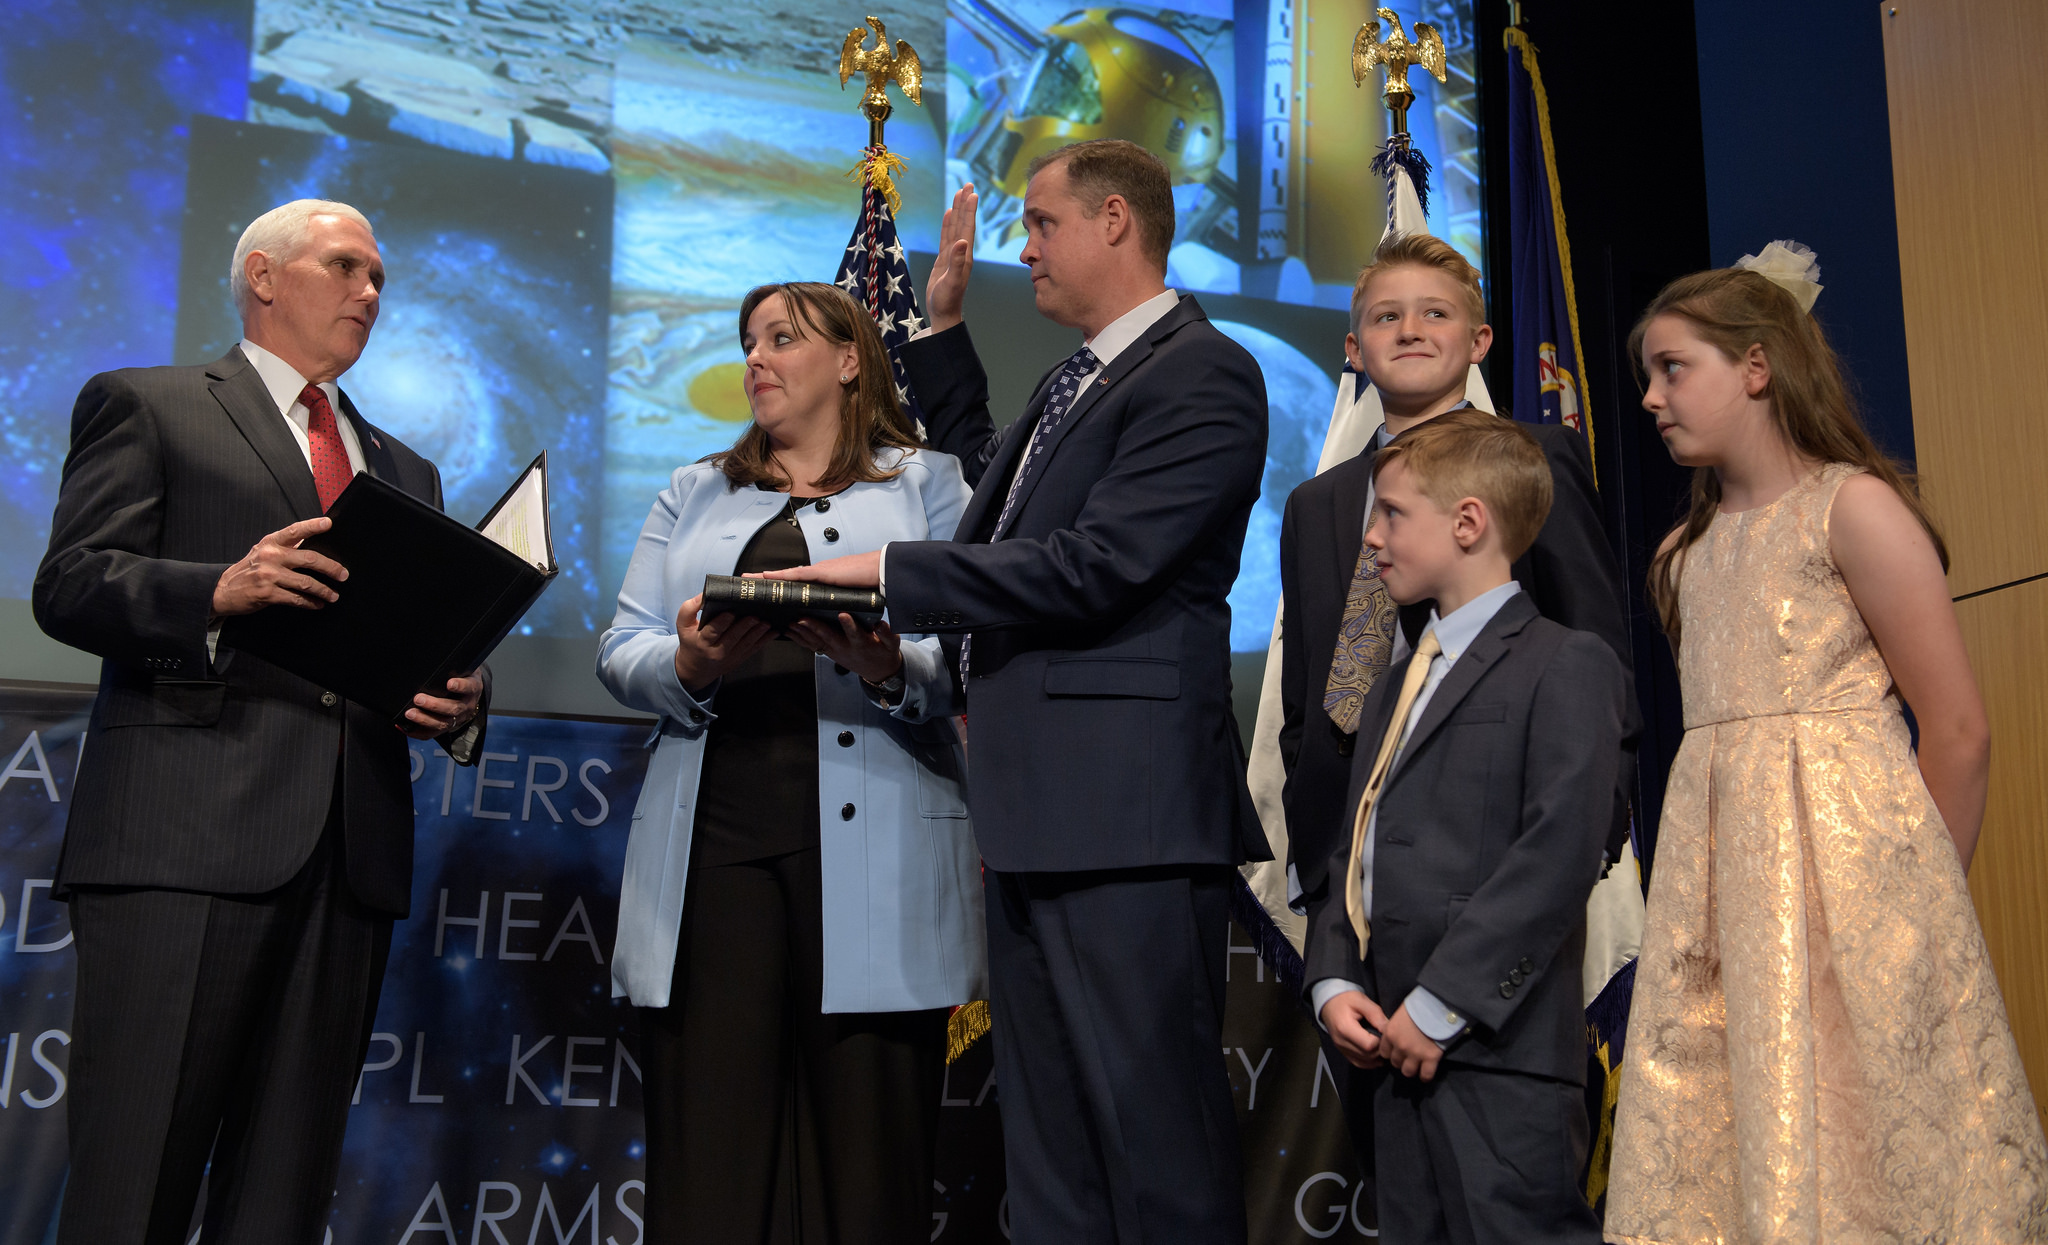 Vice President Mike Pence swears in Jim Bridenstine as the 13th NASA Administrator as Bridenstine's family watches.